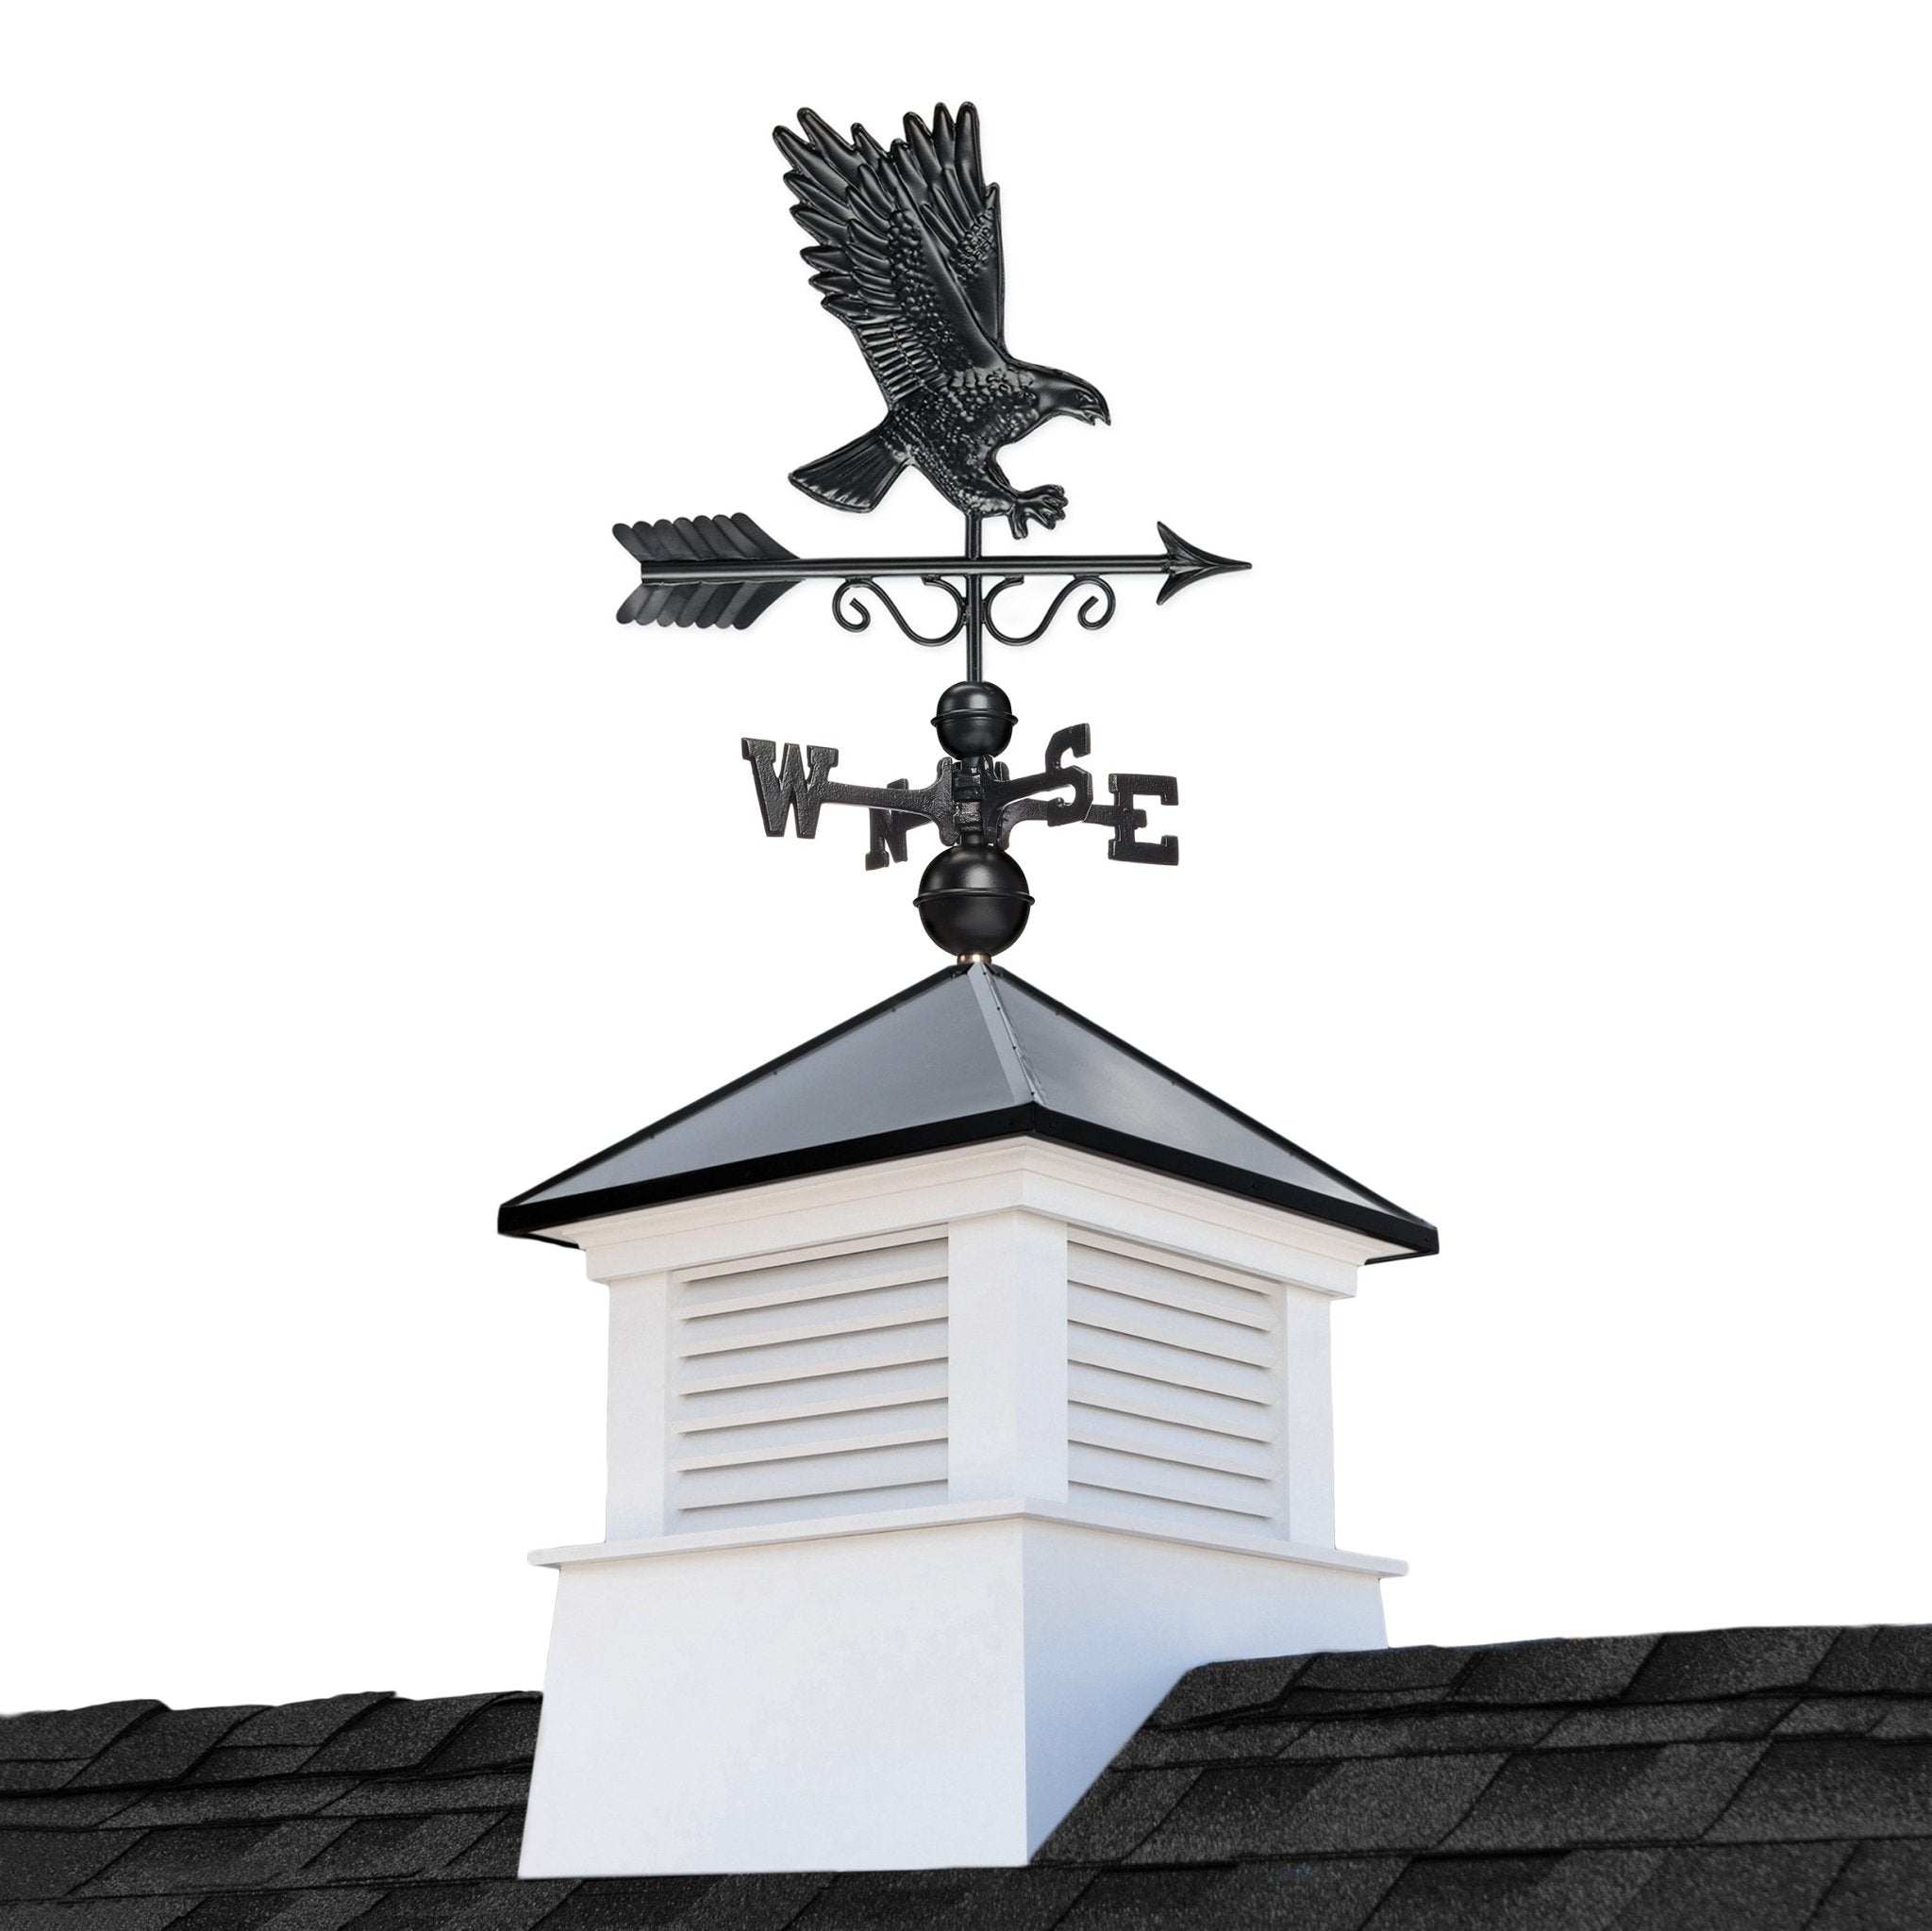 18" Square Manchester Vinyl Cupola with Black Aluminum roof and Black Aluminum Eagle Weathervane - Good Directions